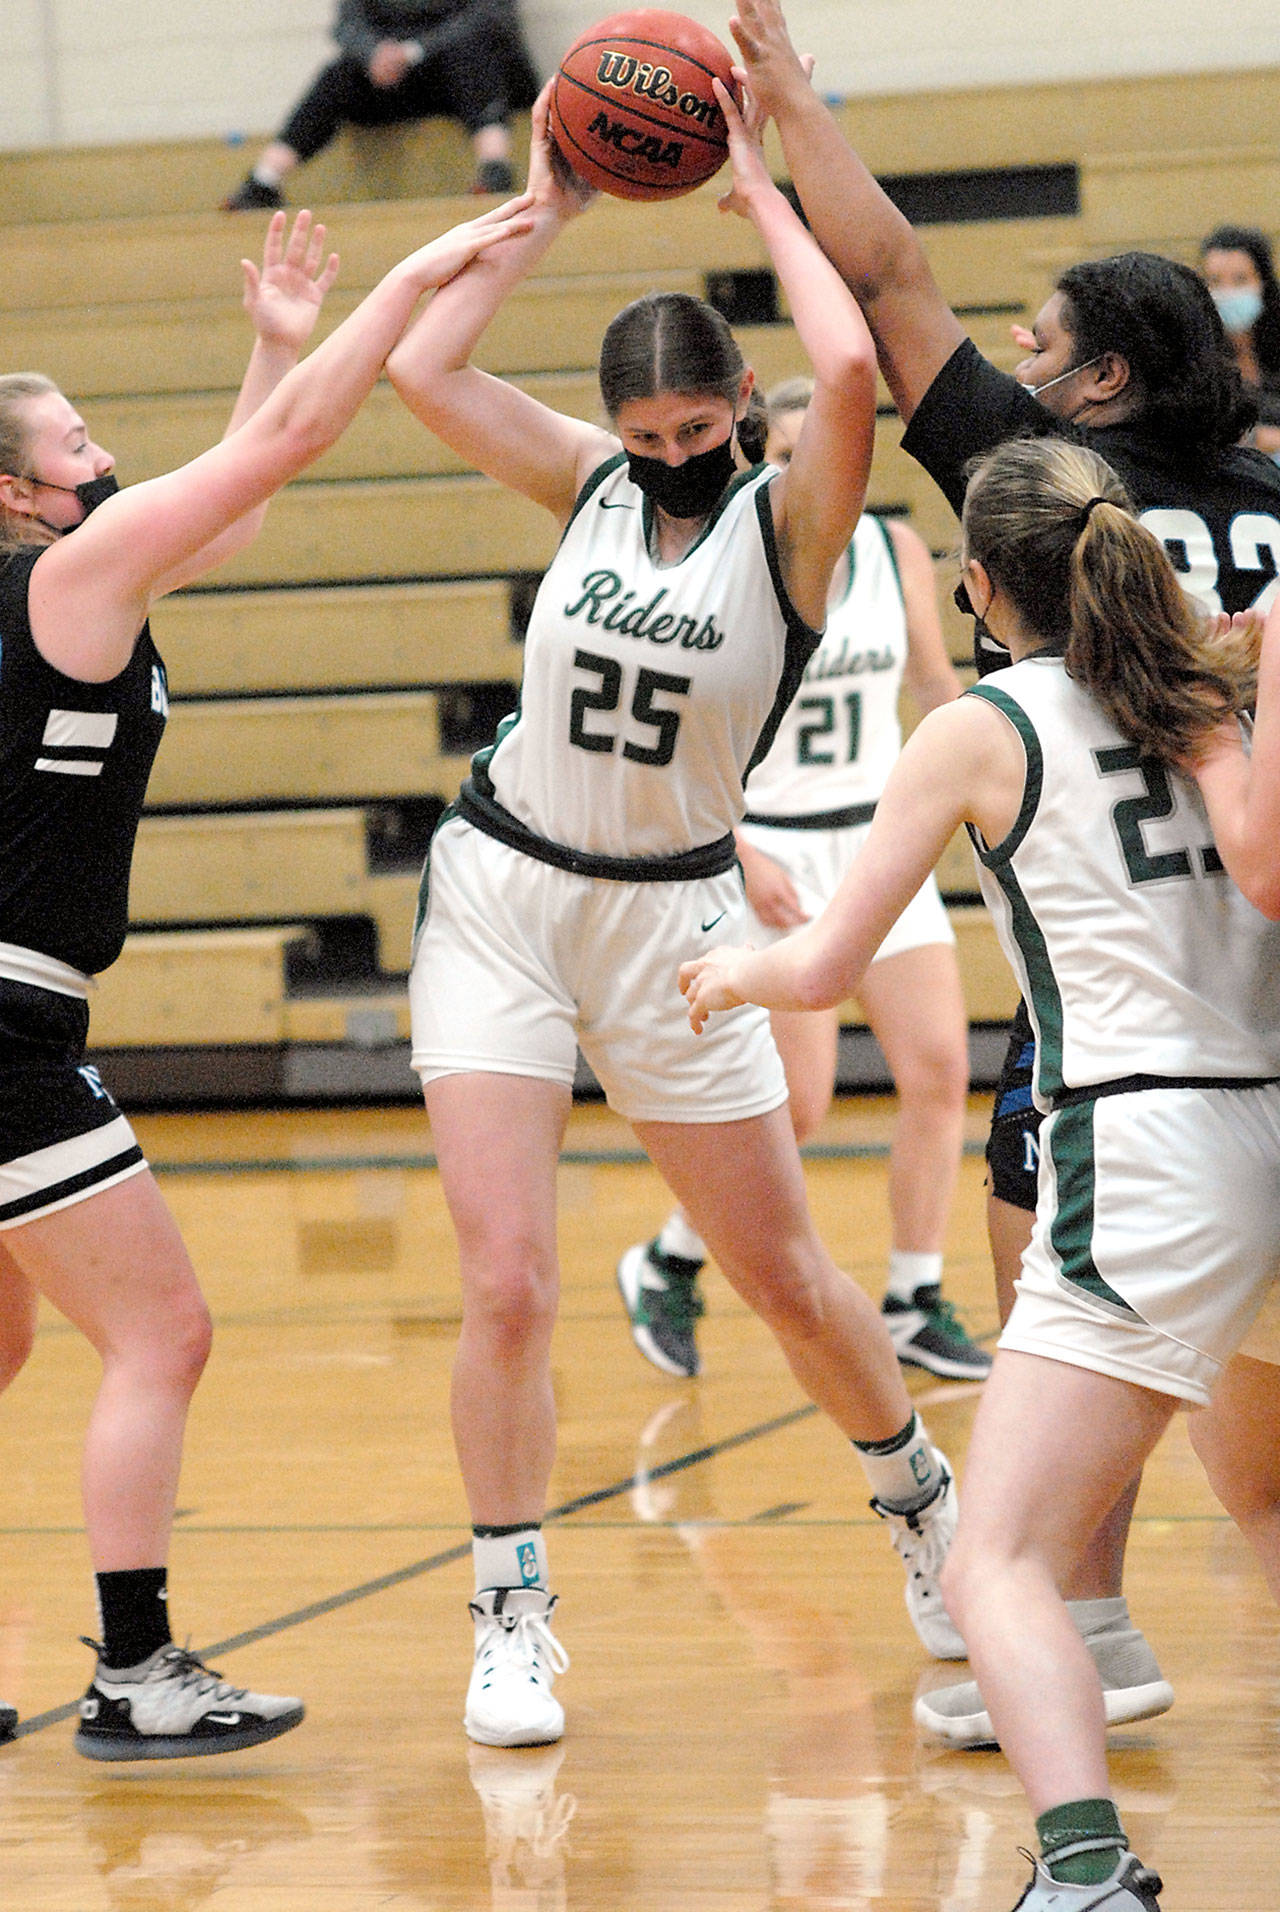 Keith Thorpe/Peninsula Daily News Port Angeles’ Ava Brenkman, center, fends of the defense of North Mason’s Tessa Griffey, left, and Tanza Tupolo, right, as Brenkman’s teammate, Bergen Shamp, tries to assist on Saturday in Port Angeles.